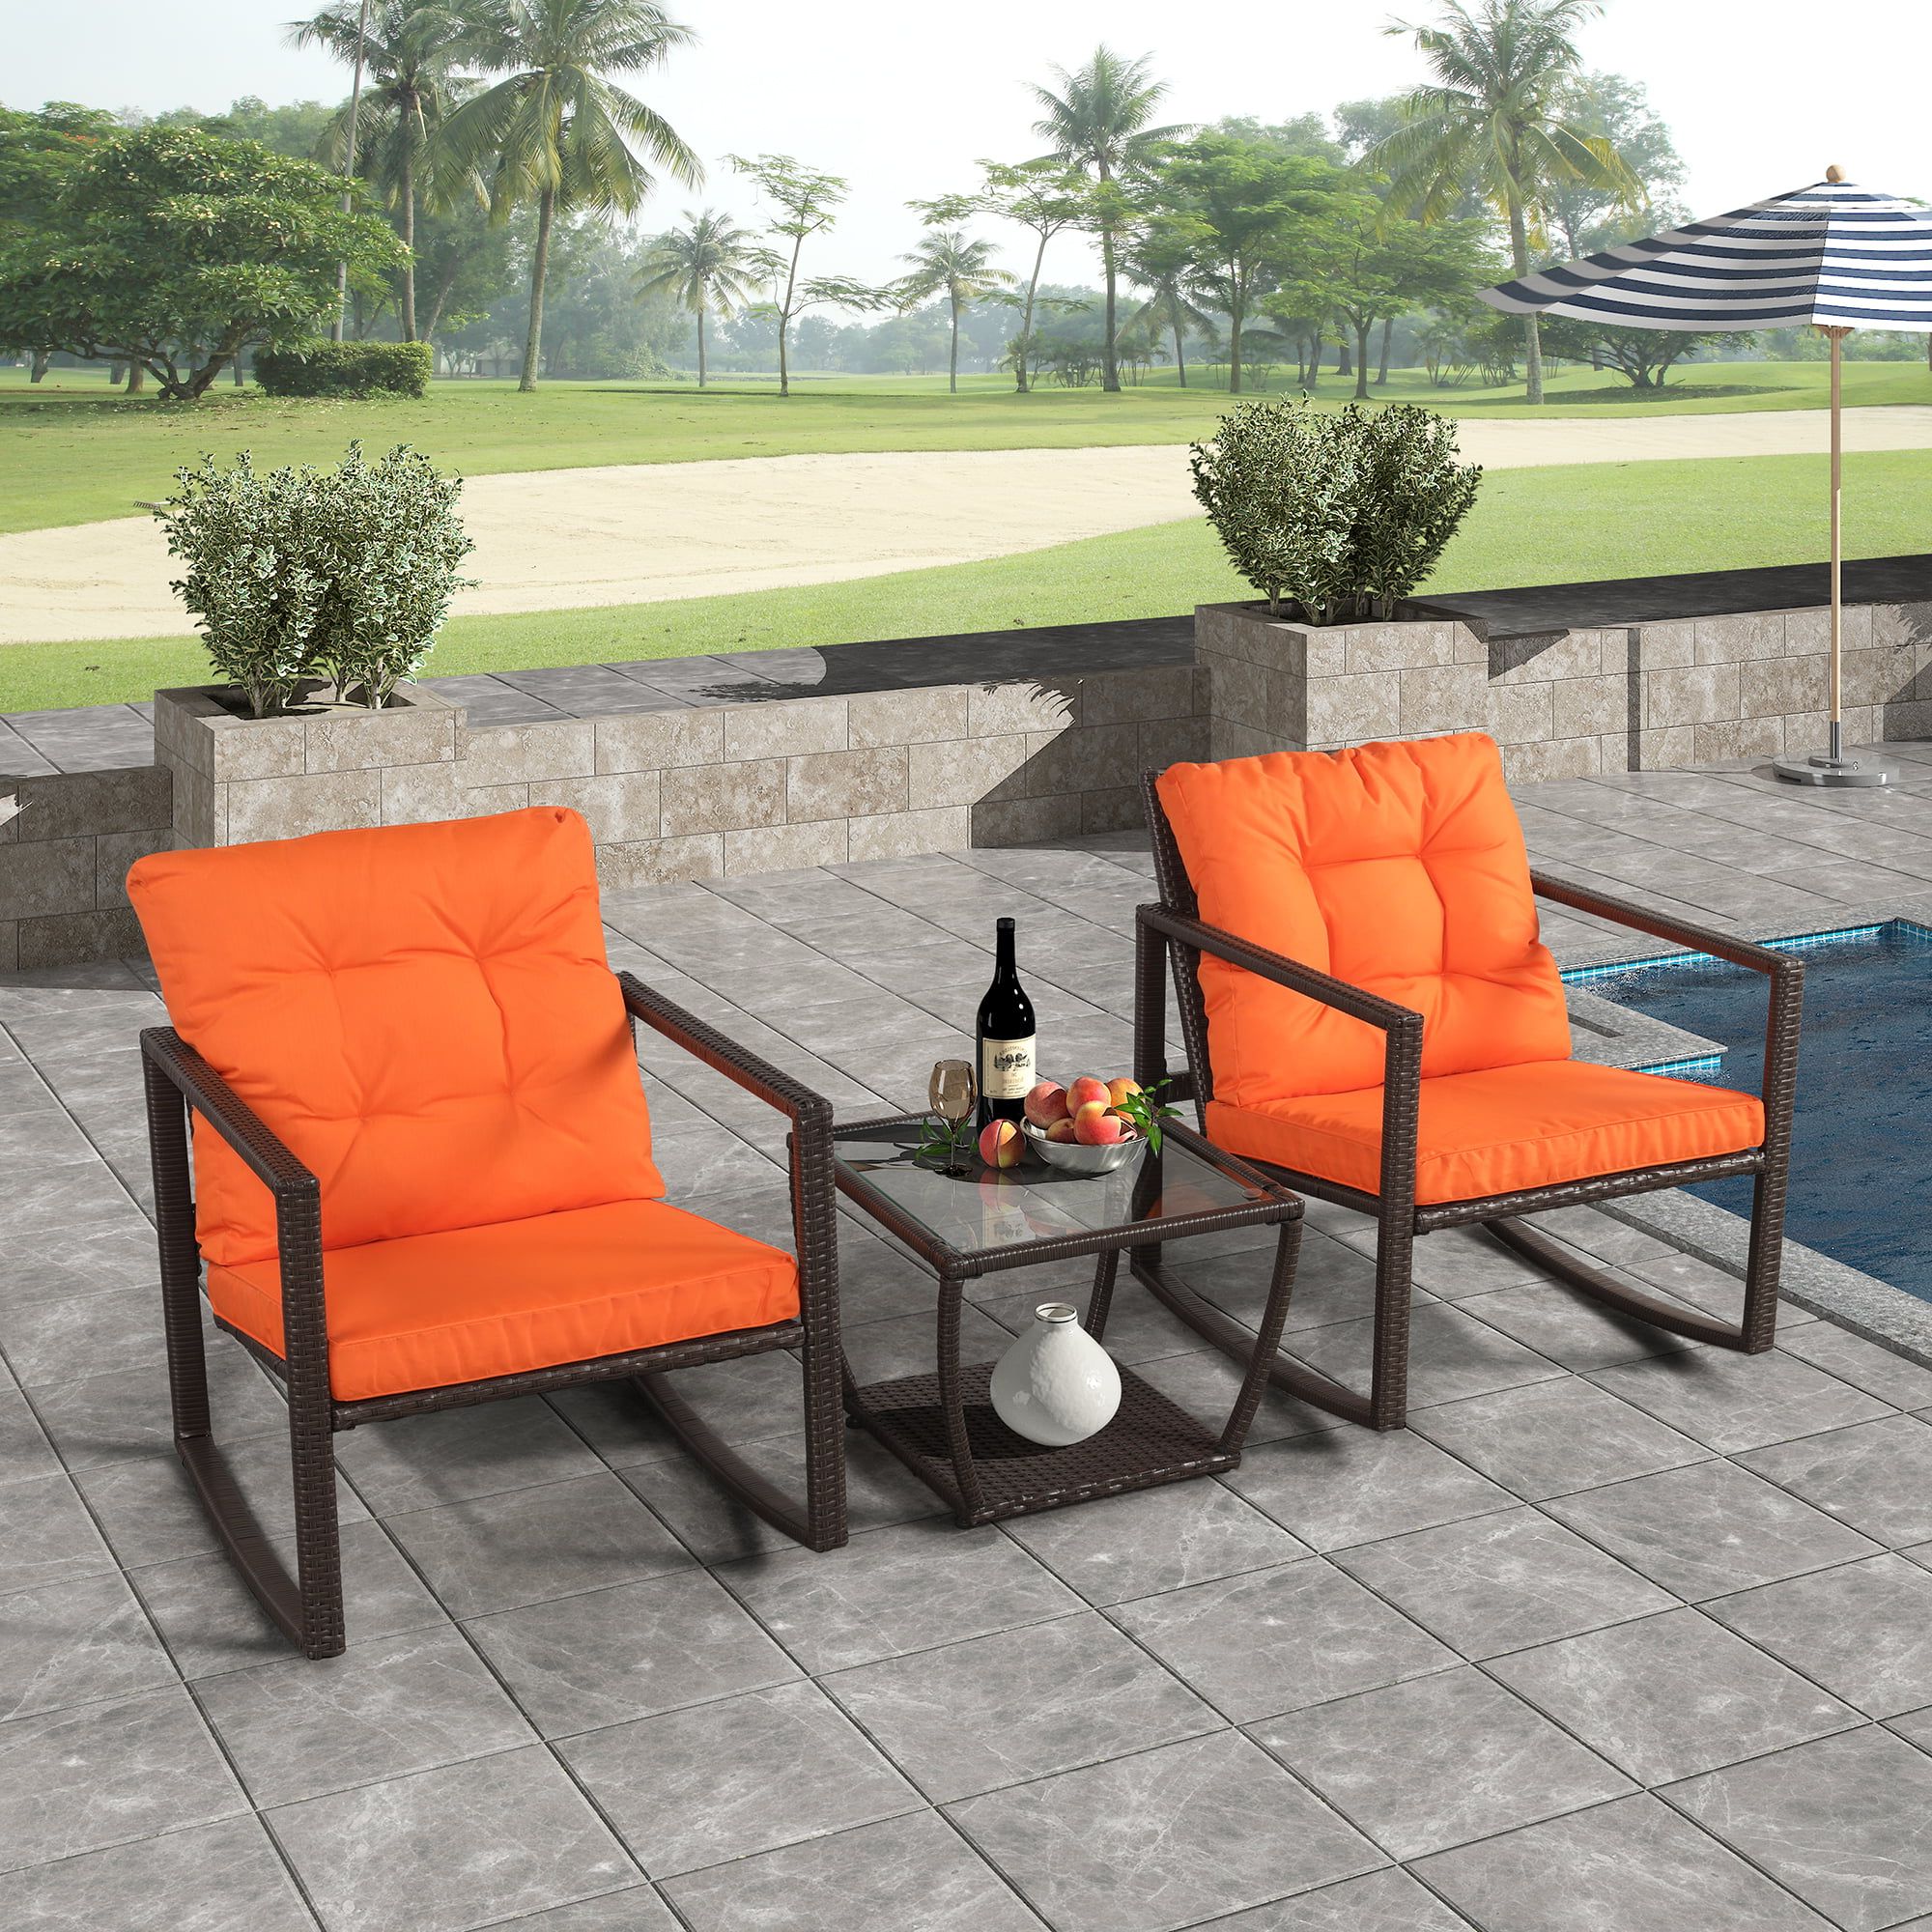 Well Known 3 Piece Cushion Rocking Chair Set Intended For Outdoor Rocking Chair 3 Piece Patio Set, Wicker Outdoor Patio Furniture  With Rocking Chair And Table, Patio Rocking Chair For Outdoor Garden,  All Weather Rocking Lounge Chair, Orange Cushion, W10688 – Walmart (View 12 of 15)